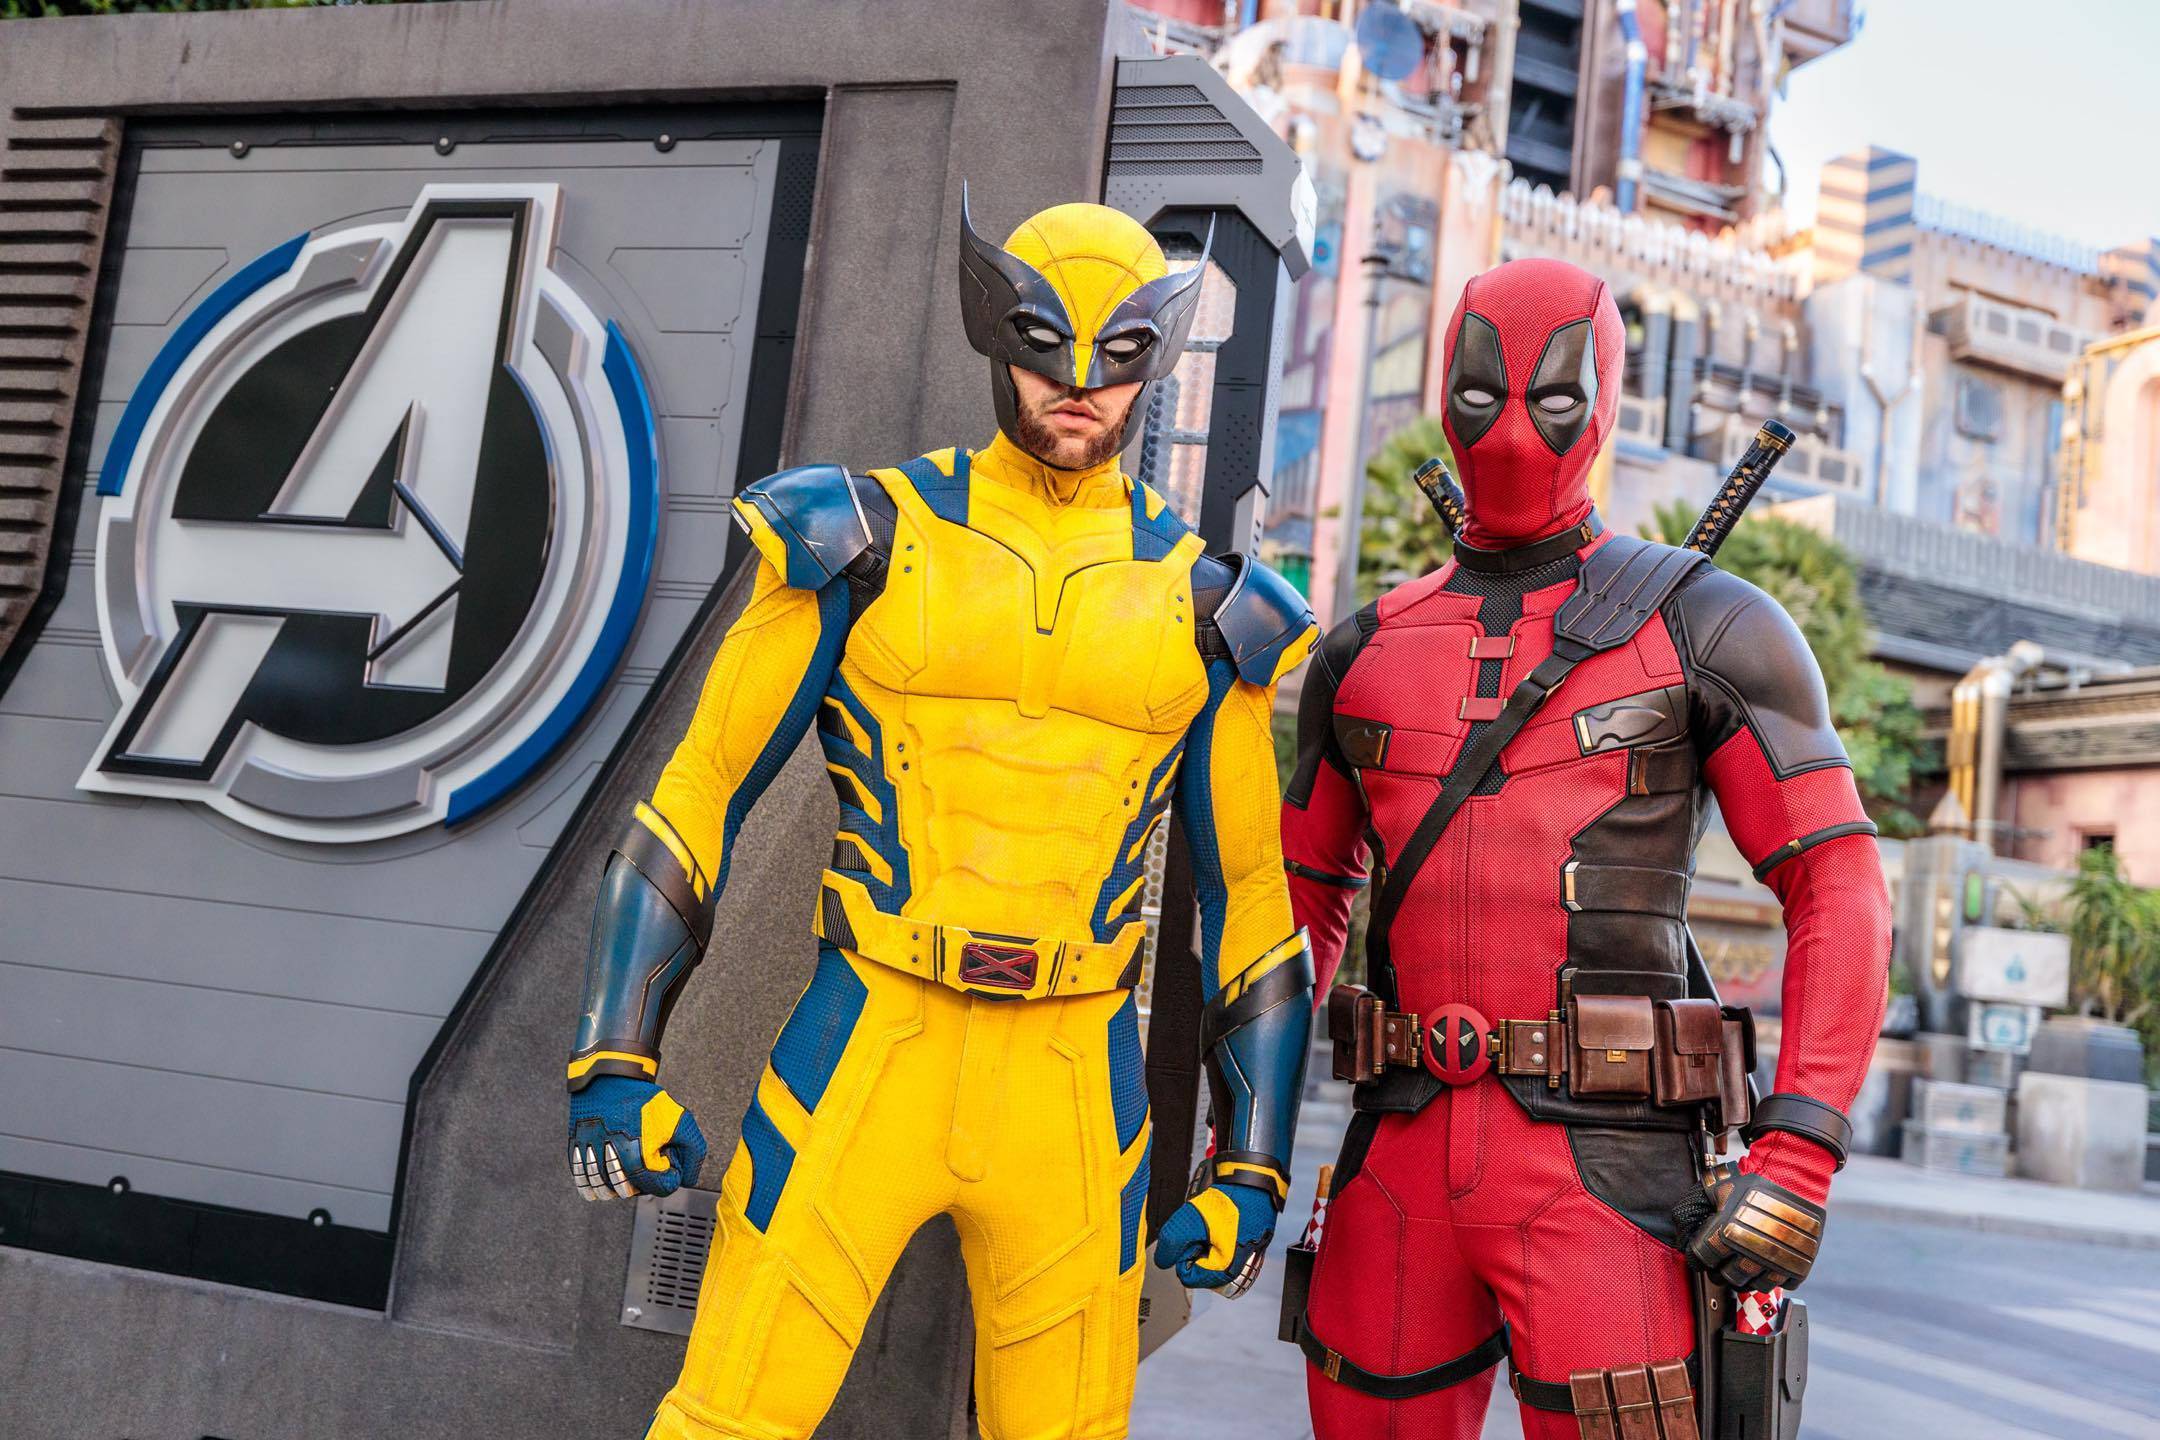 Deadpool and Wolverine at Avengers Campus